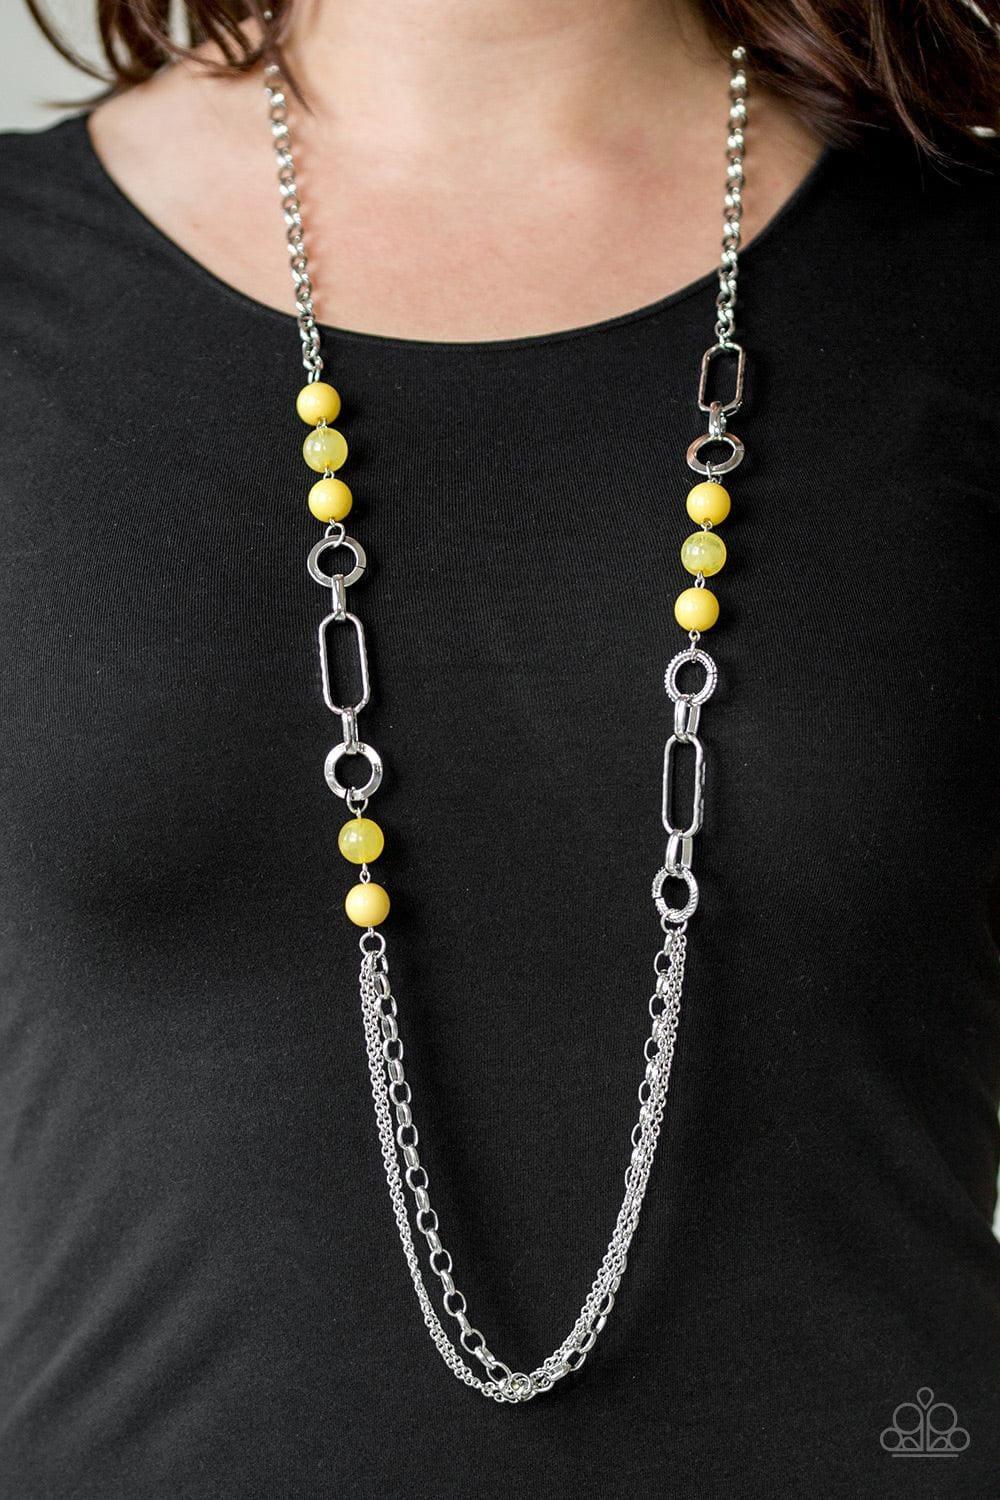 Paparazzi Accessories - Cache Me Out - Yellow Necklace - Bling by JessieK